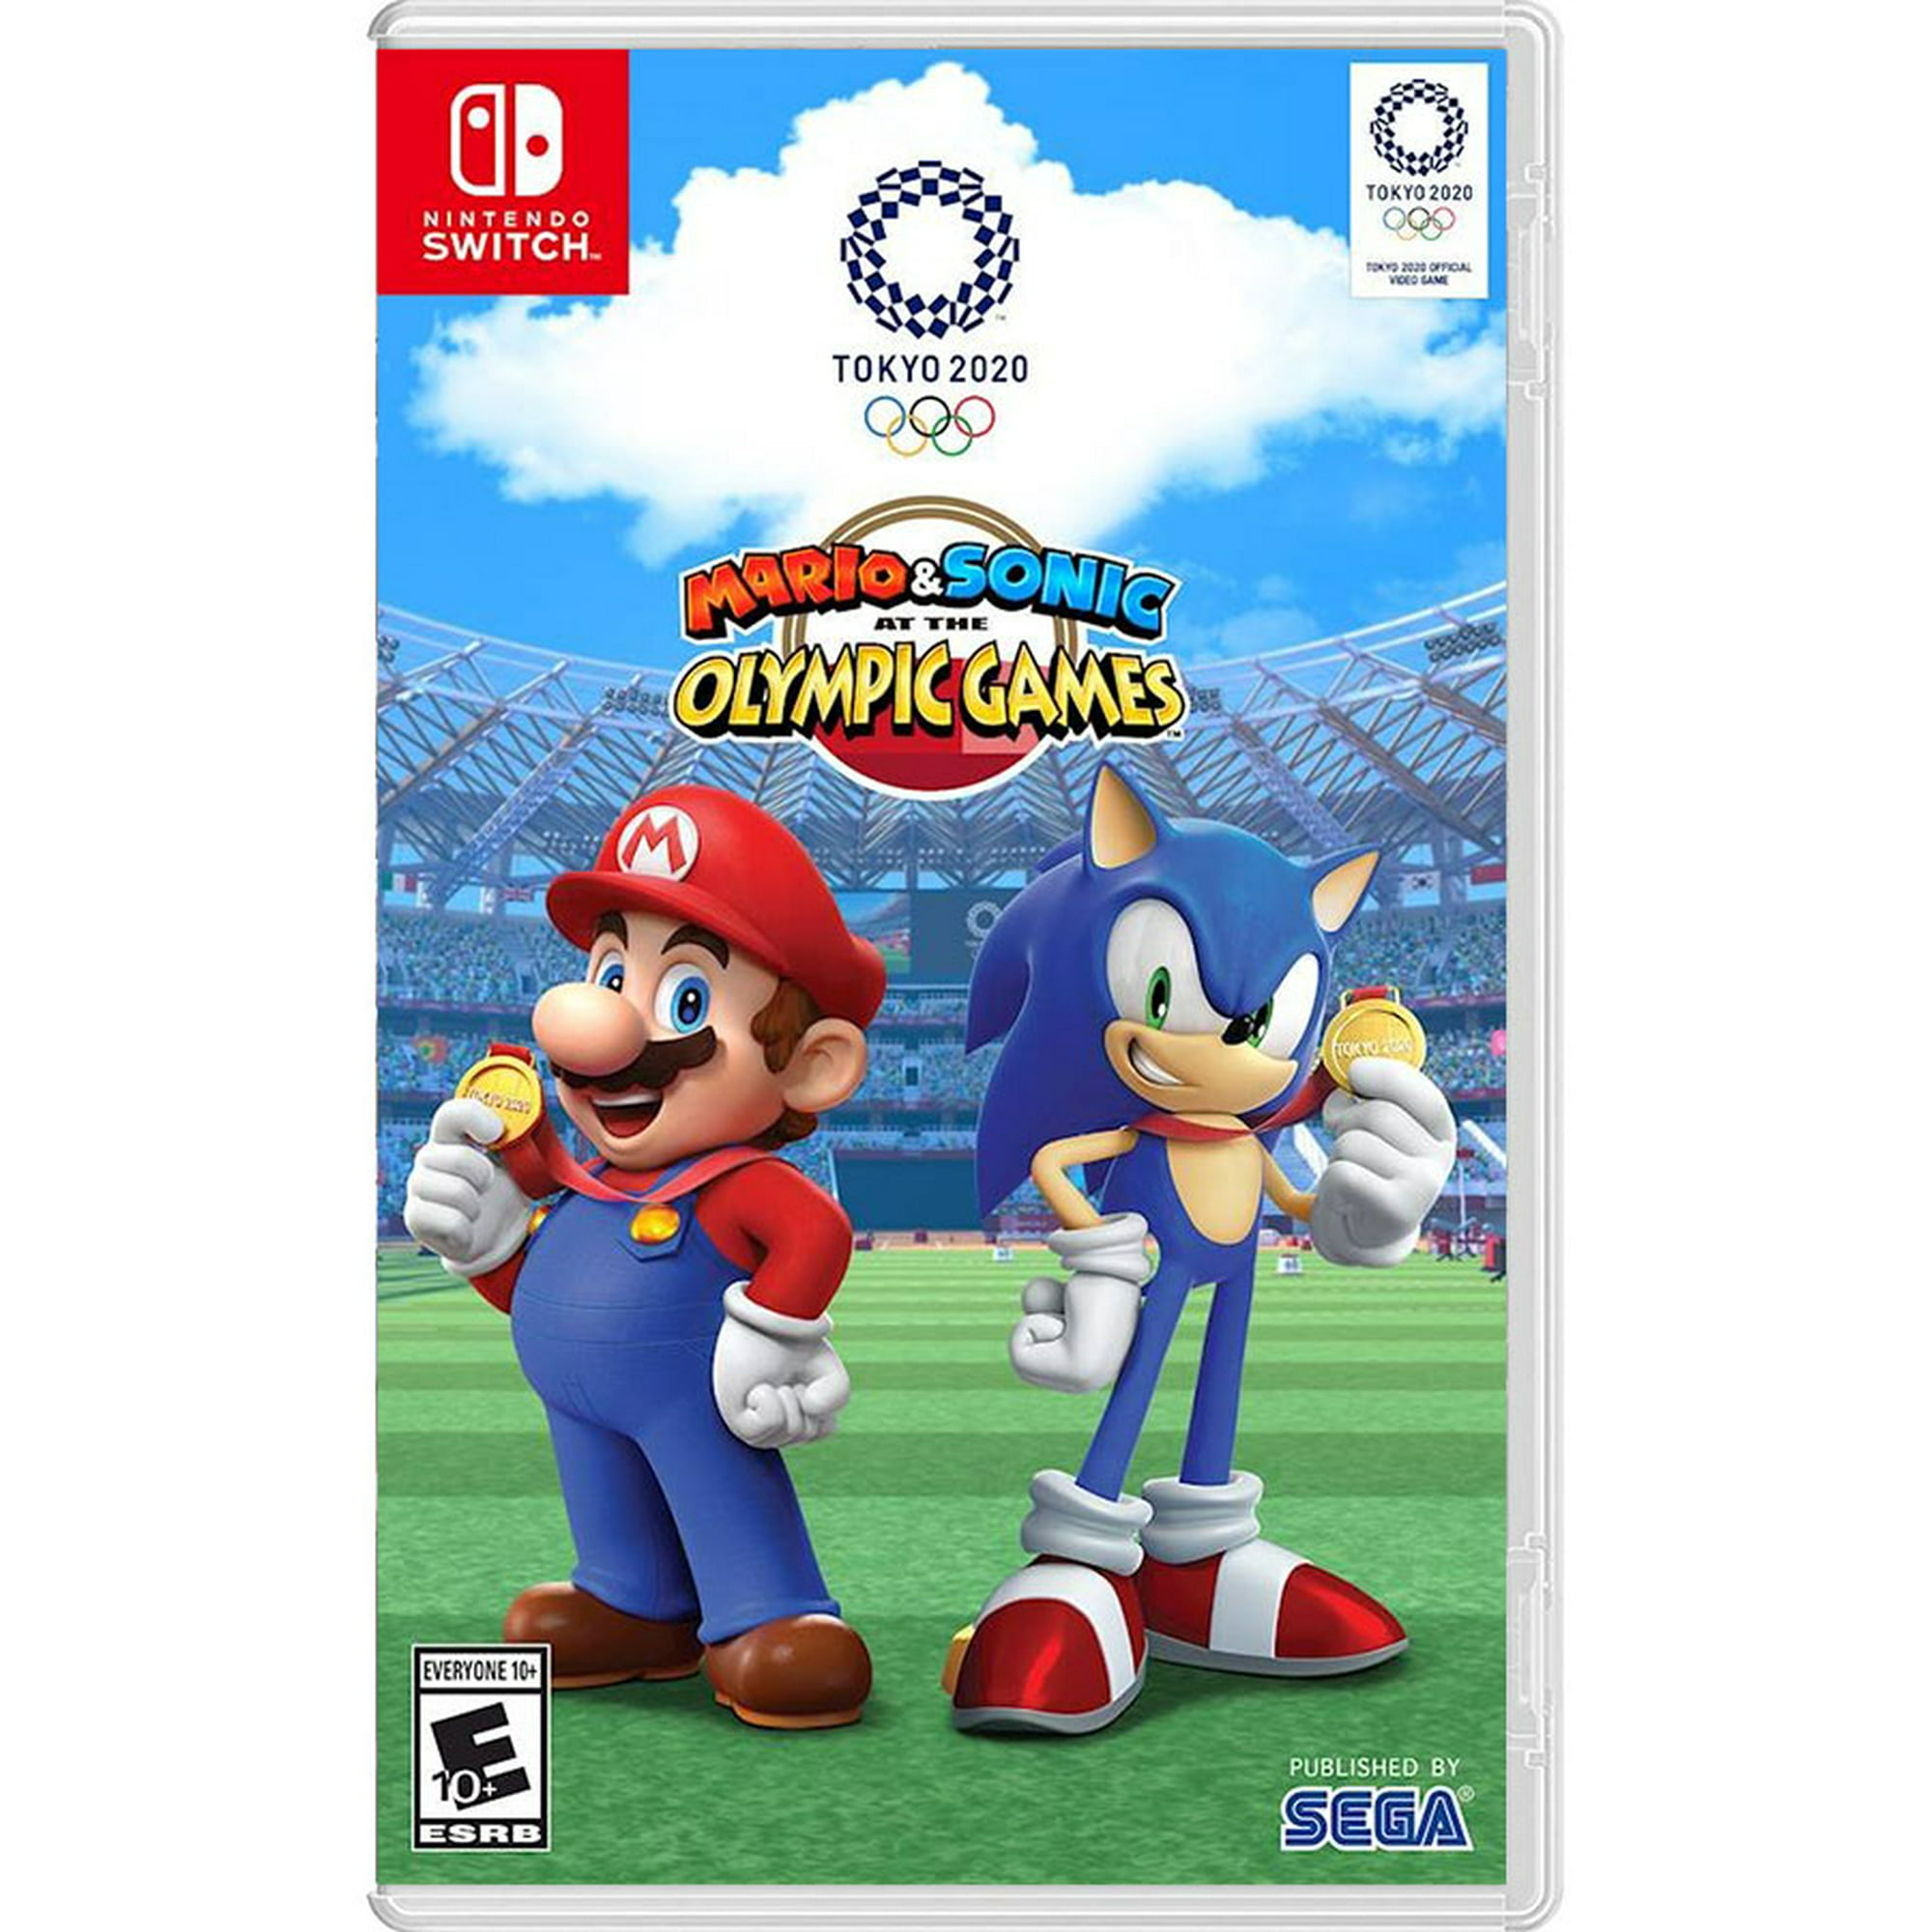 SW MARIO AND SONIC AT THE OLYMPIC GAMES Nintendo Switch SWMSATOG